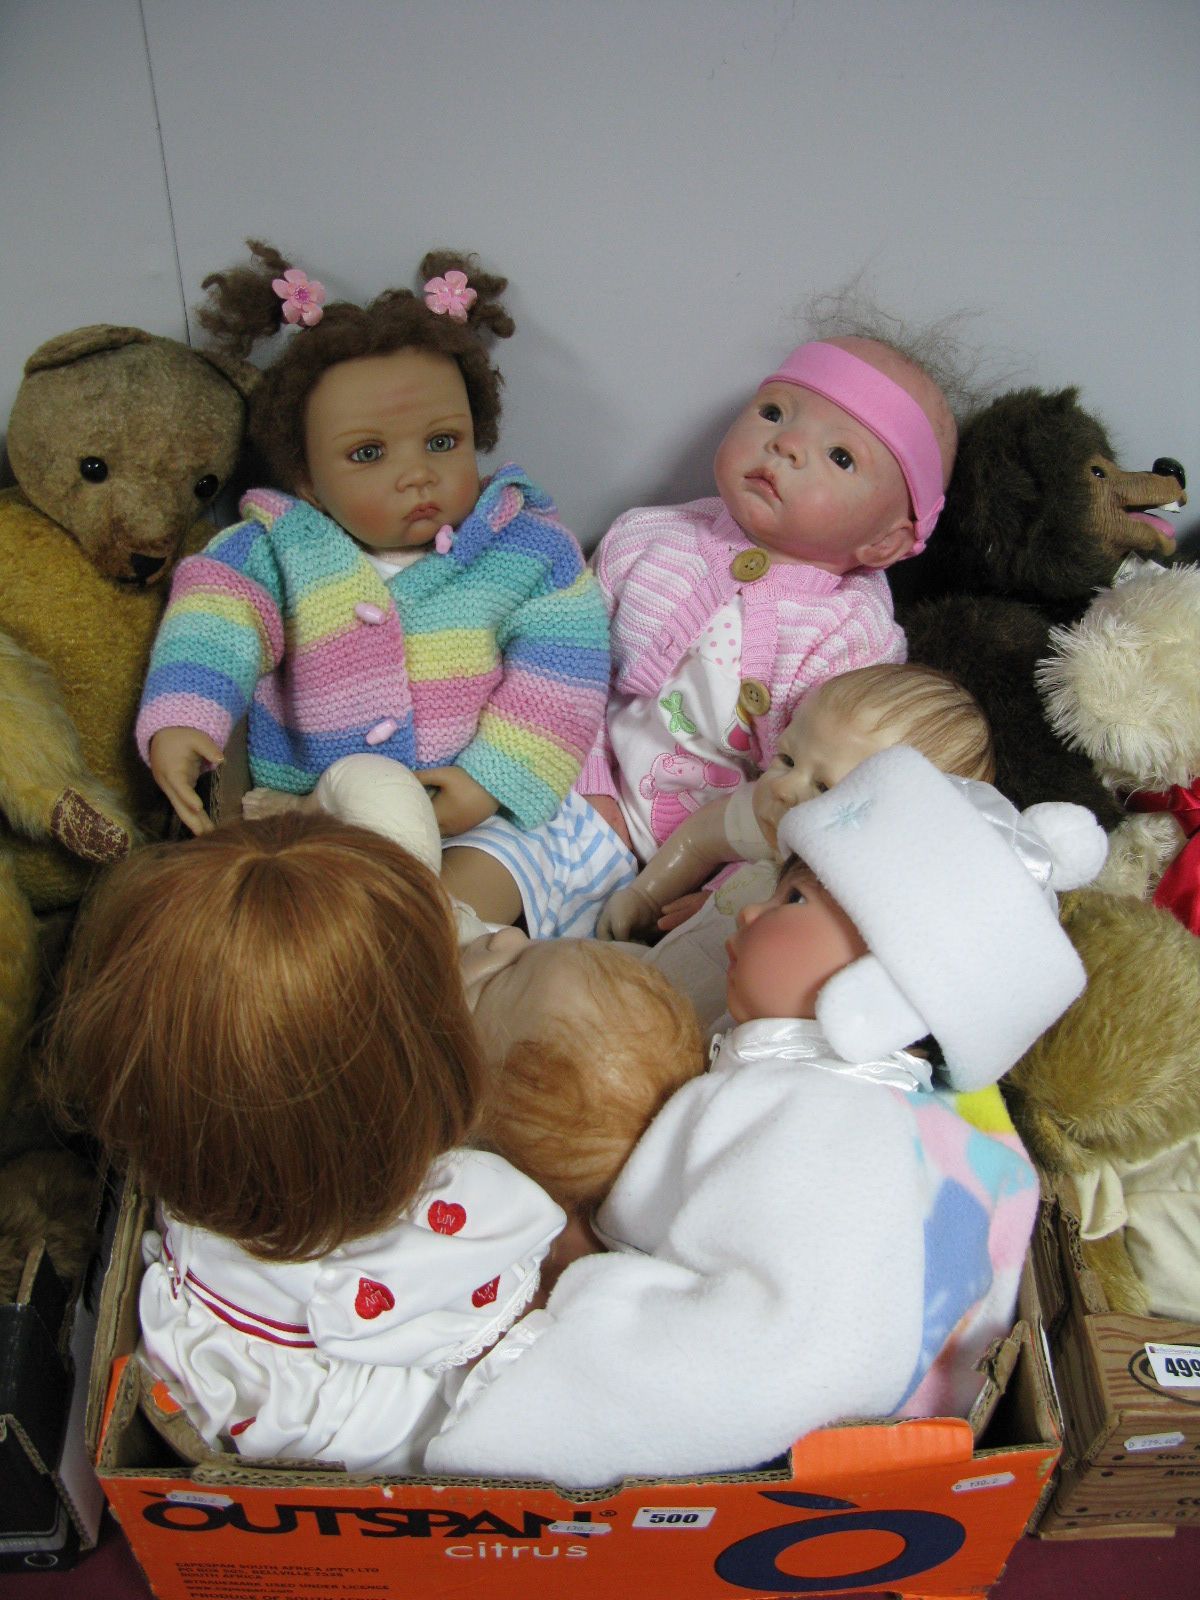 A Reborn Doll, wearing pink cardigan, together with other dolls including Ashton Drake dolls, Anna